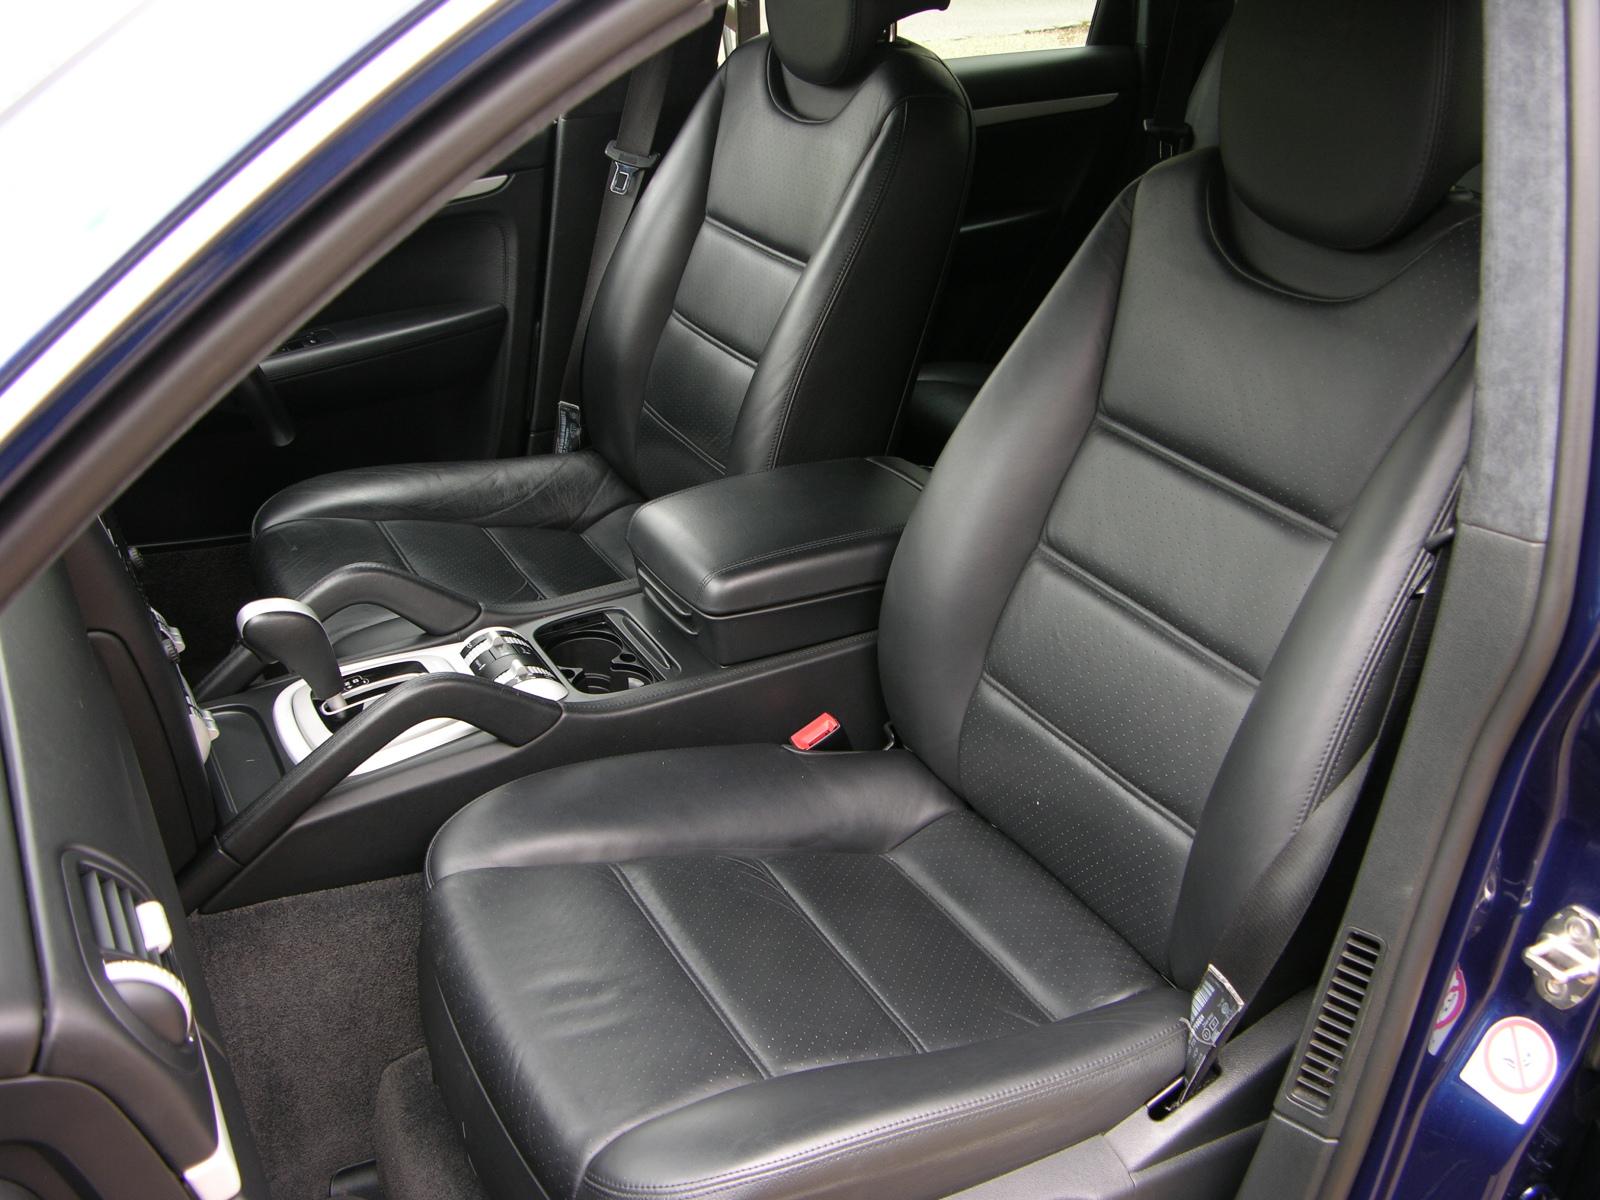 the inside view of the car with the driver's side seats in place